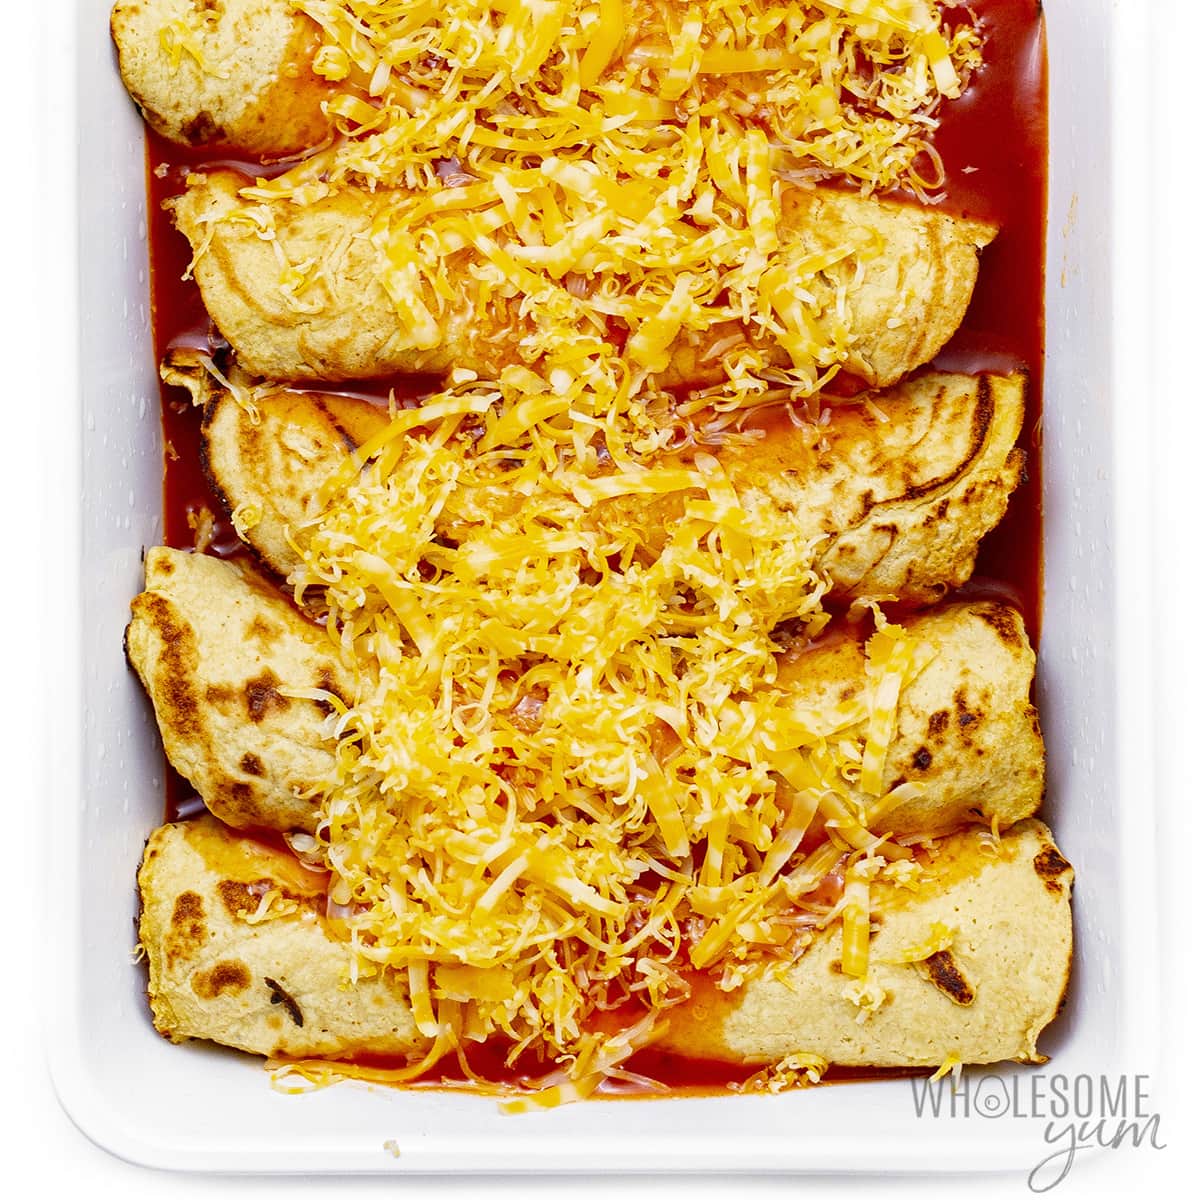 Keto enchiladas topped with shredded cheese.